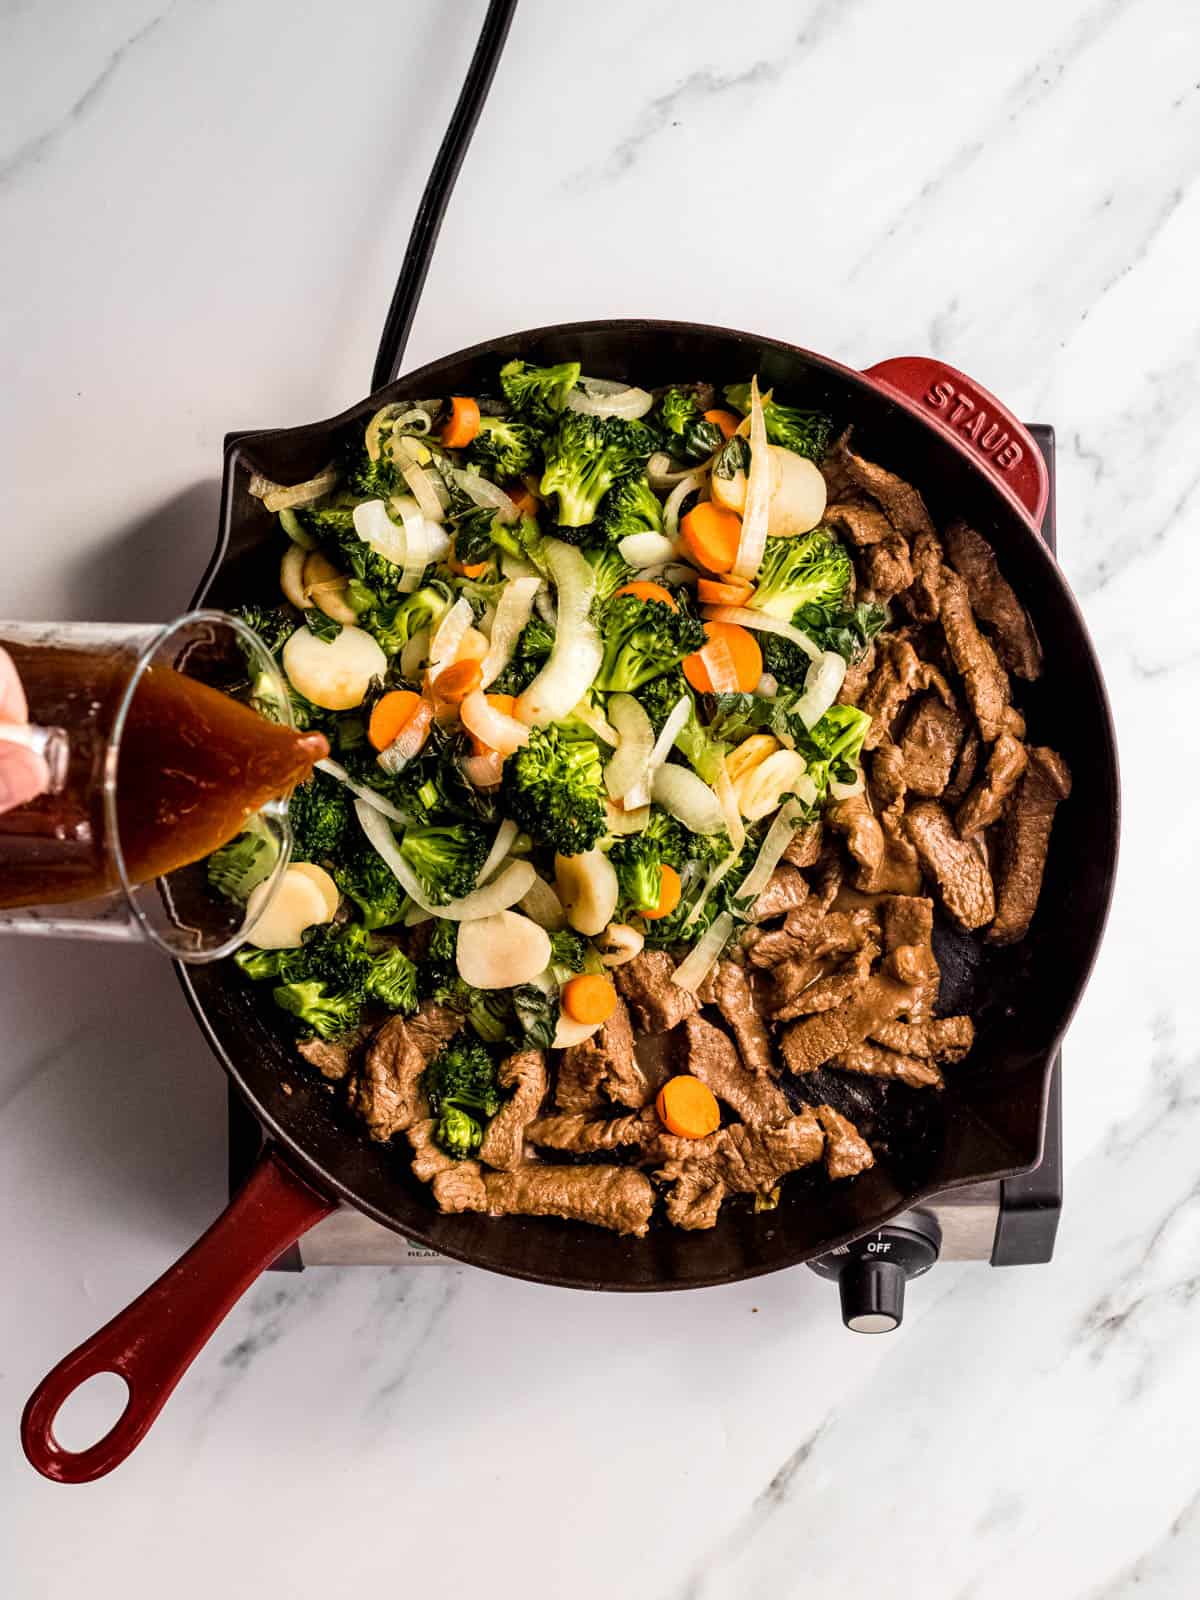 Beef and vegetables cooking in a skillet for Chinese stir fry.